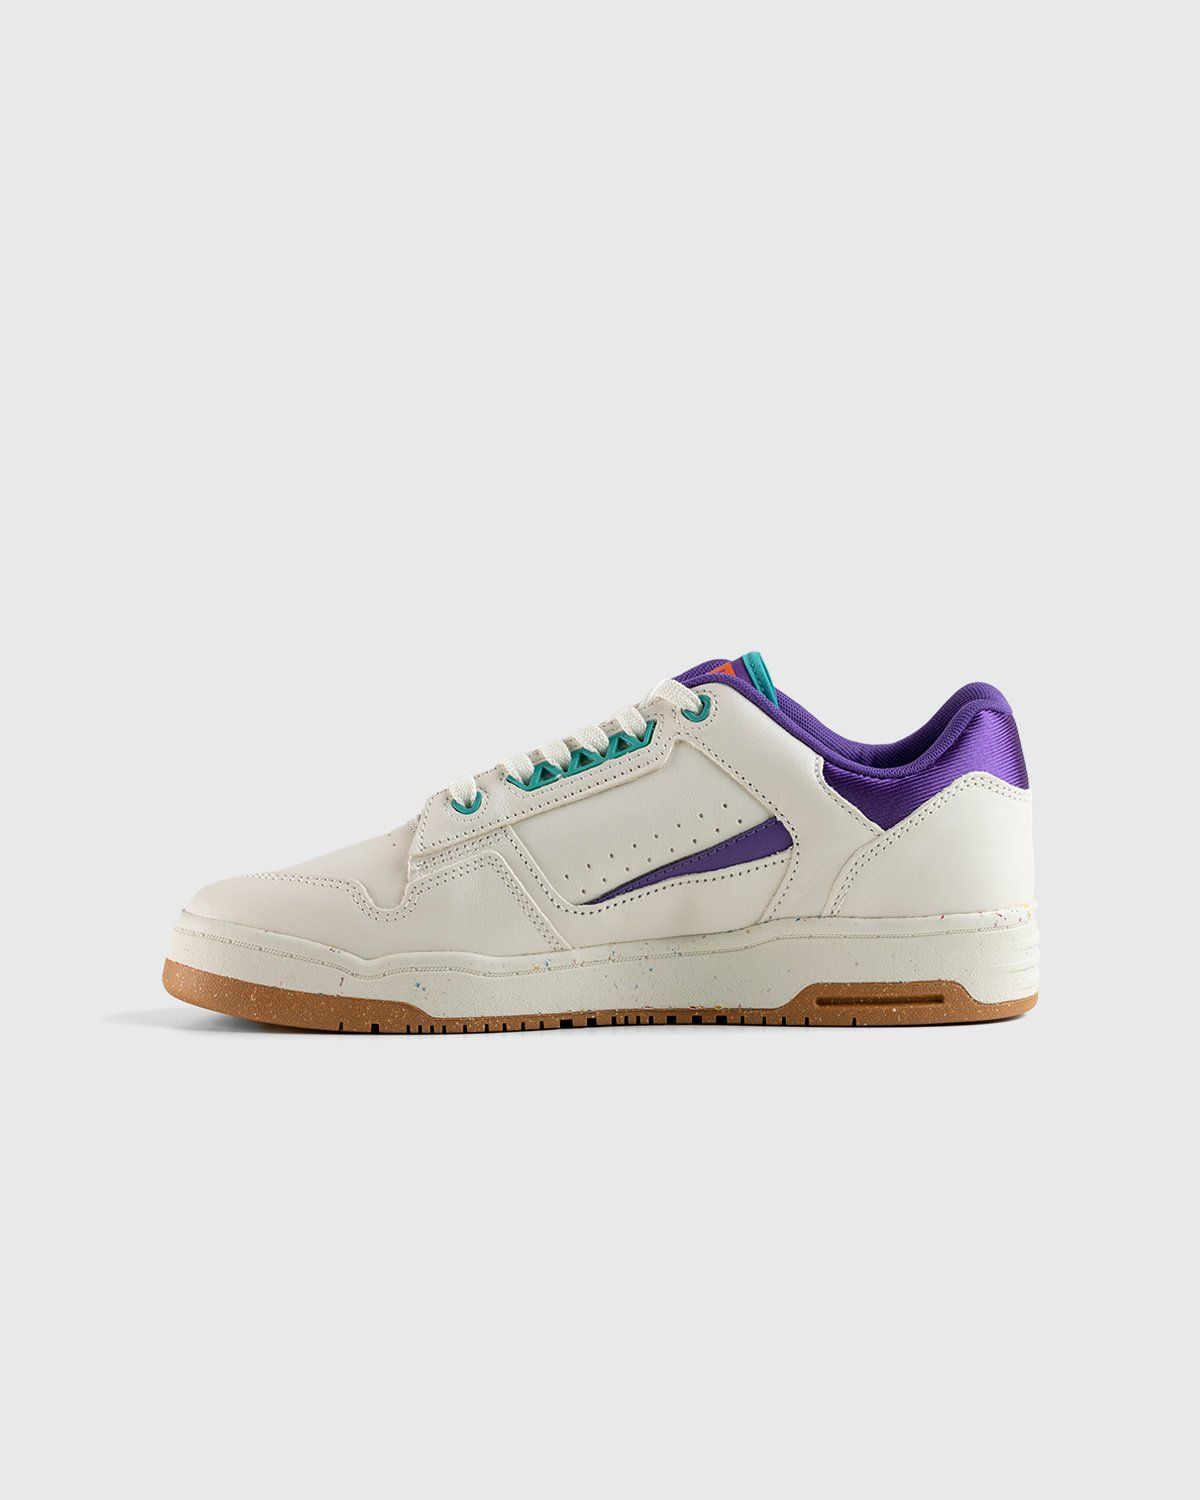 Puma x Butter Goods – Slipstream Lo Whisper White/Prism Violet/Navigate - Low Top Sneakers - Black - Image 2